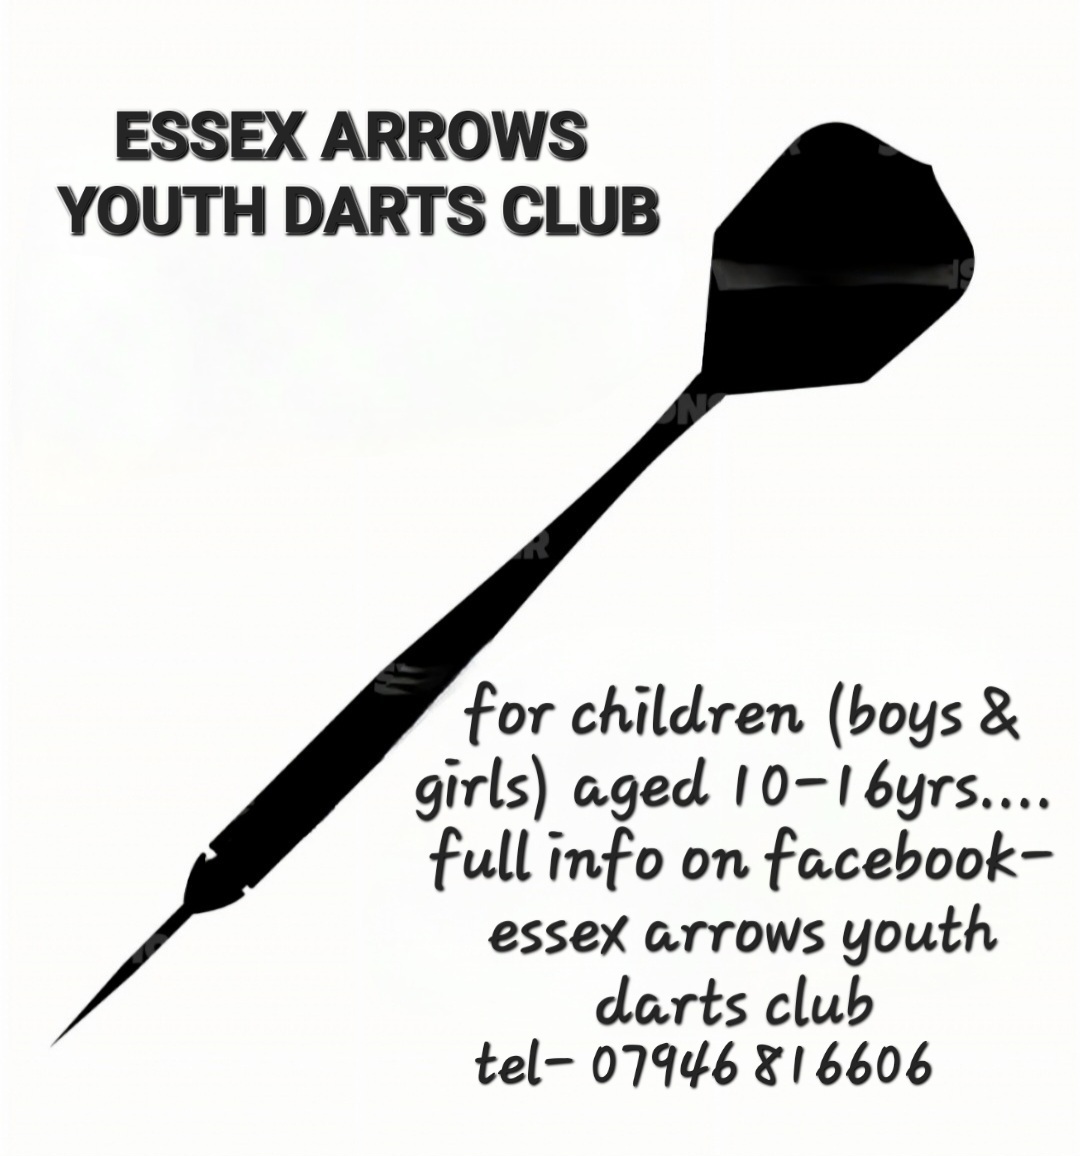 Featured image for “Essex Arrows Youth Darts Club fundraiser”